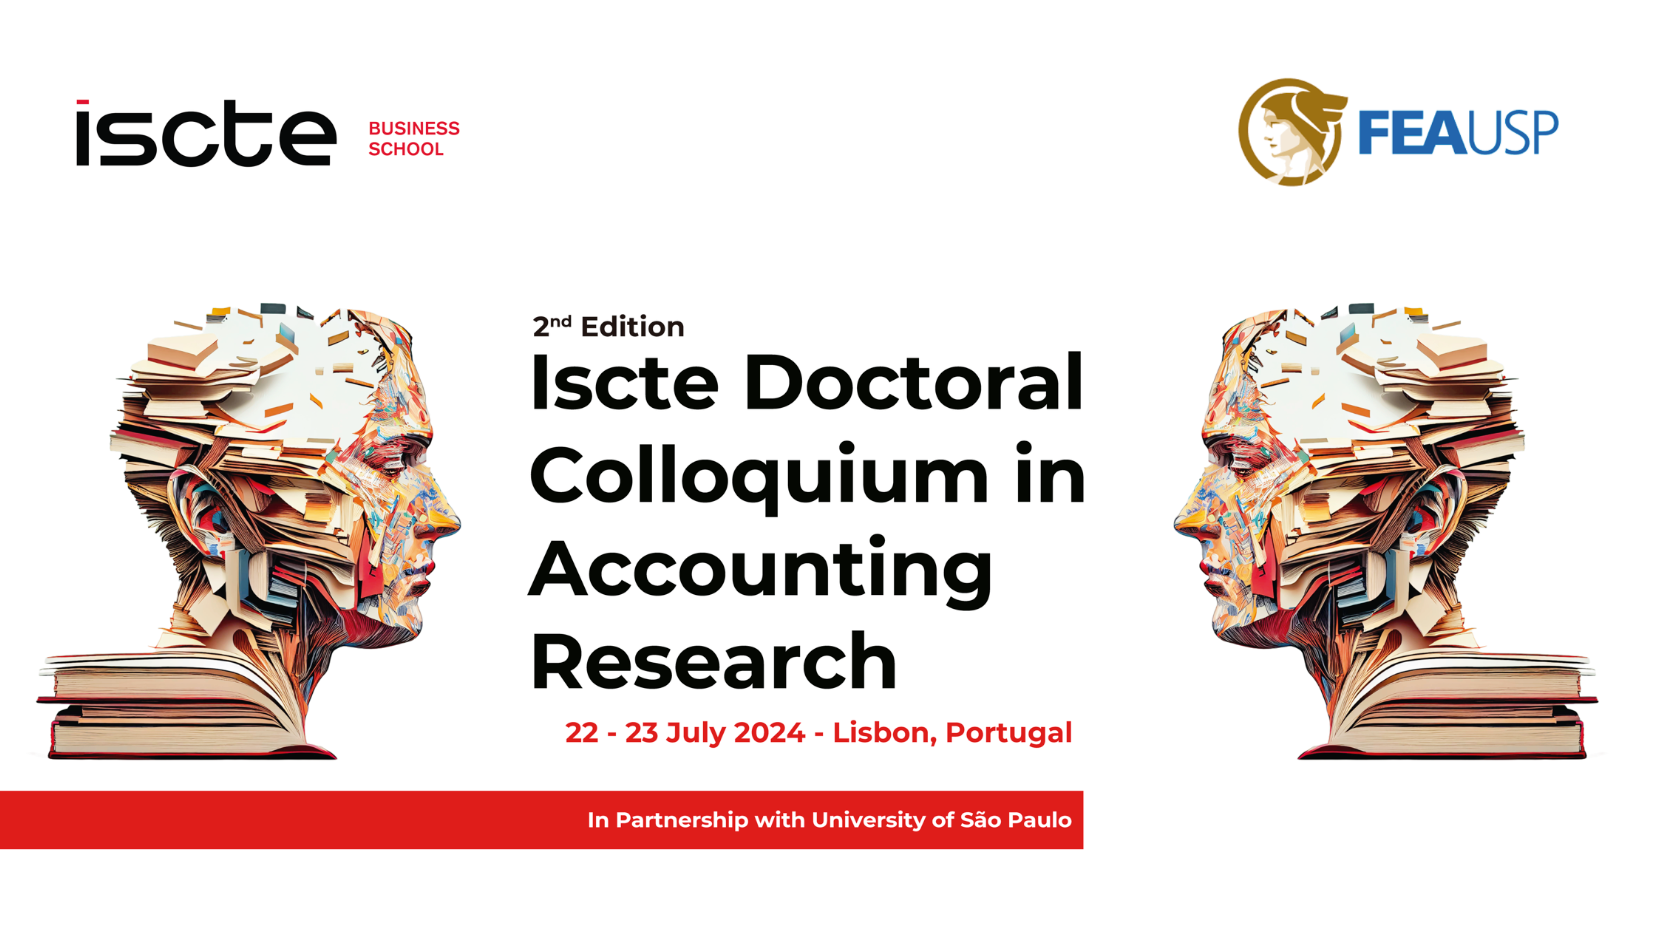 II ISCTE DOCTORAL COLLOQUIUM IN ACCOUNTING RESEARCH